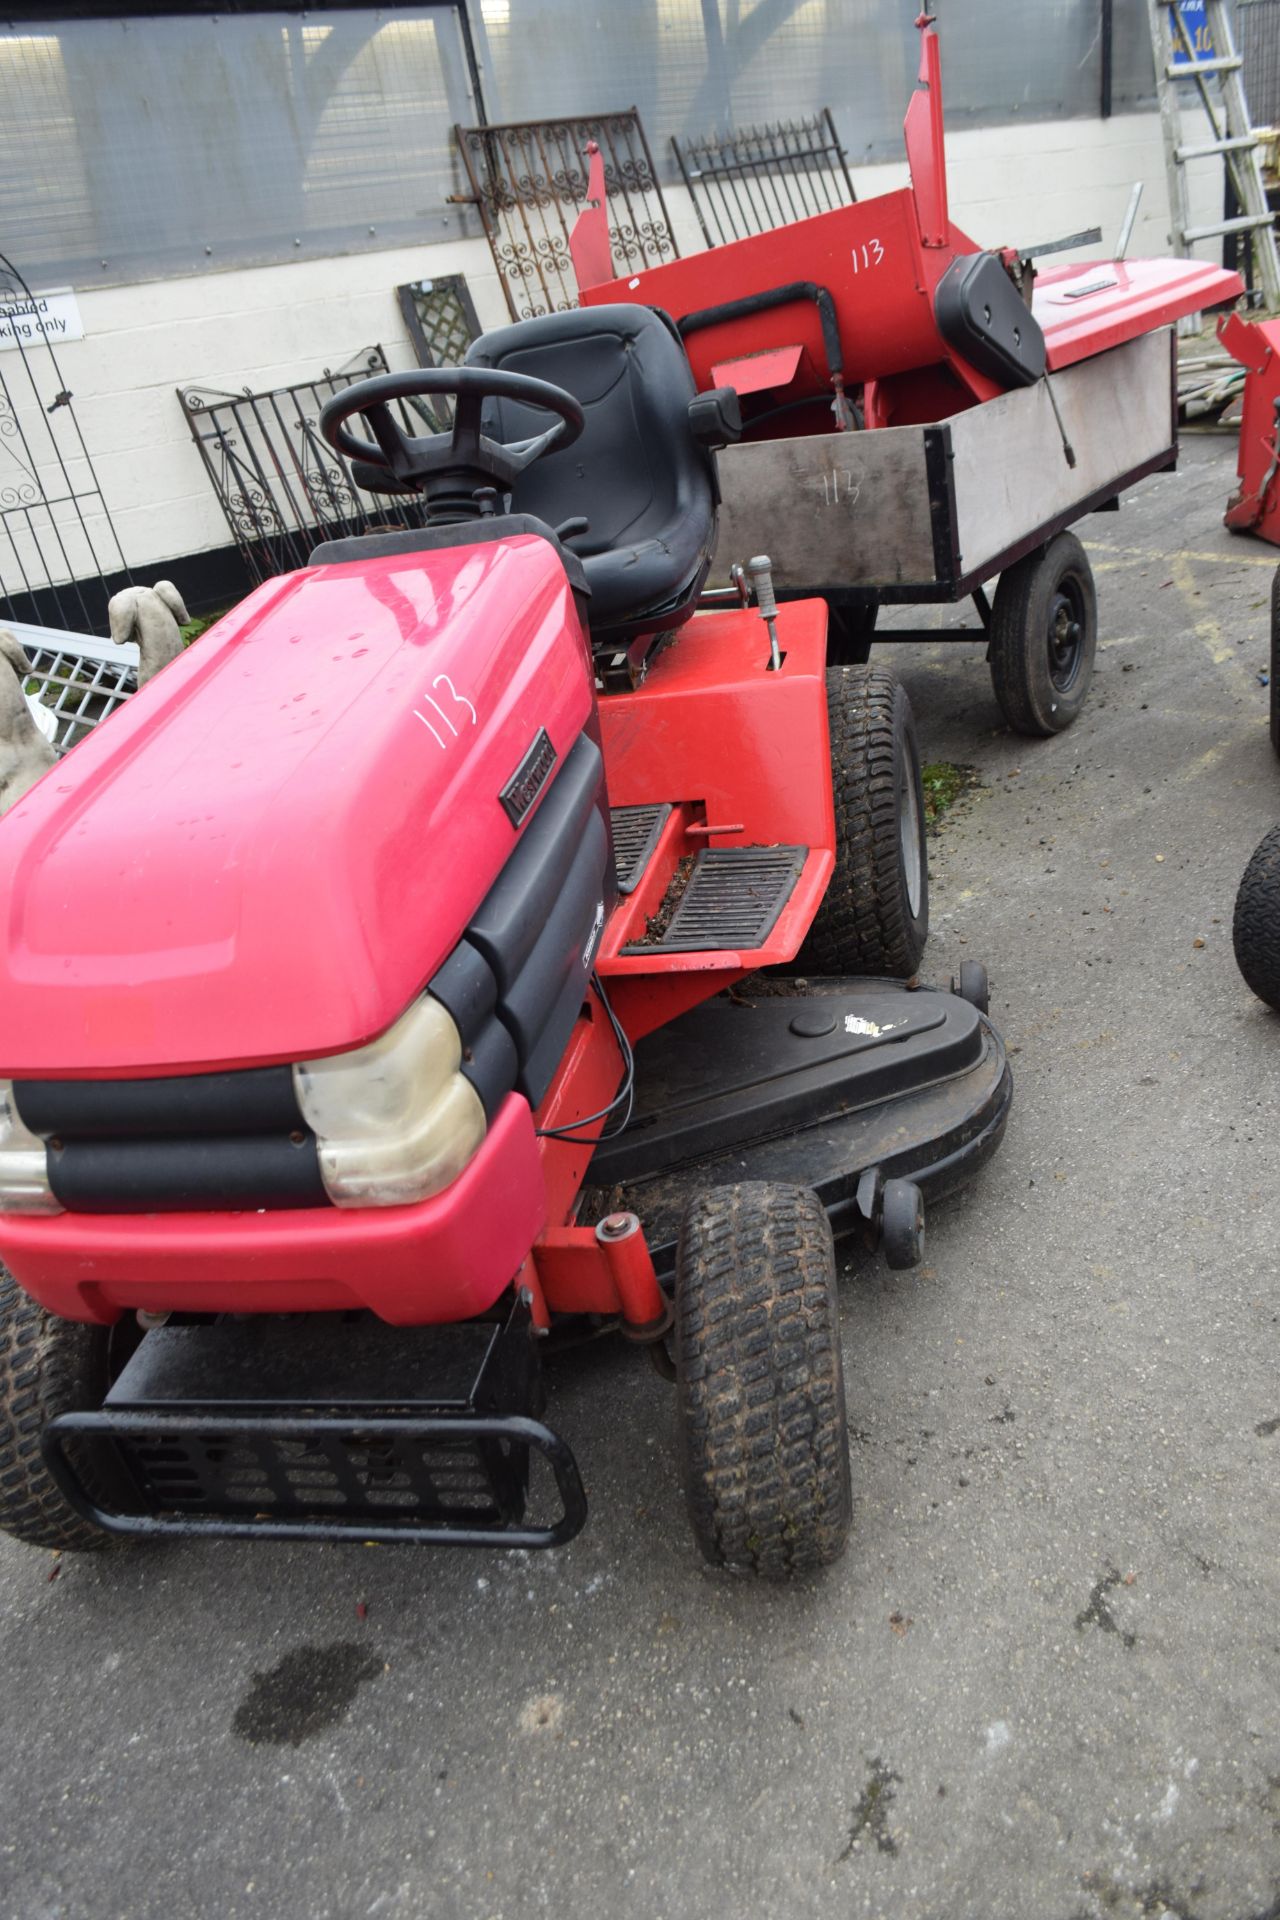 Westwood ride-on lawnmower together with a cutting deck, grass collector and back box, and a